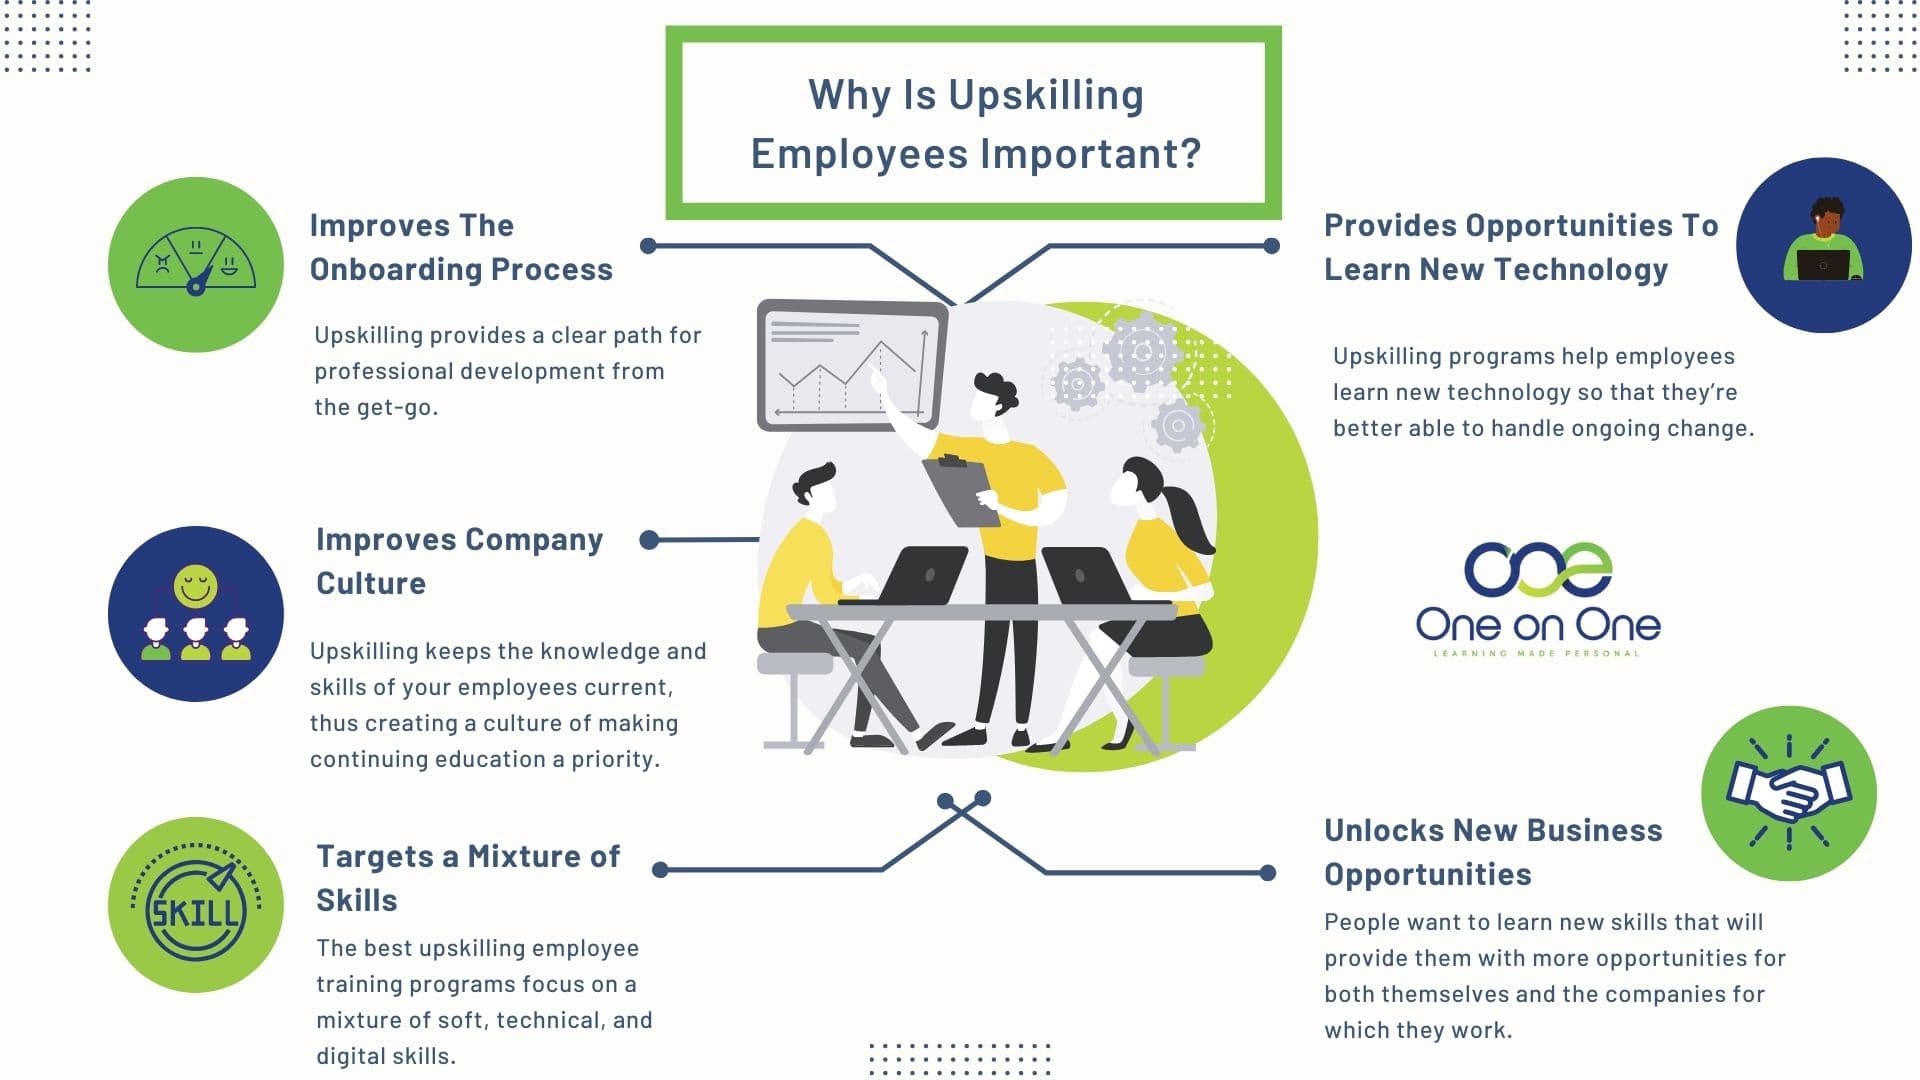 Why is upskilling employees important?